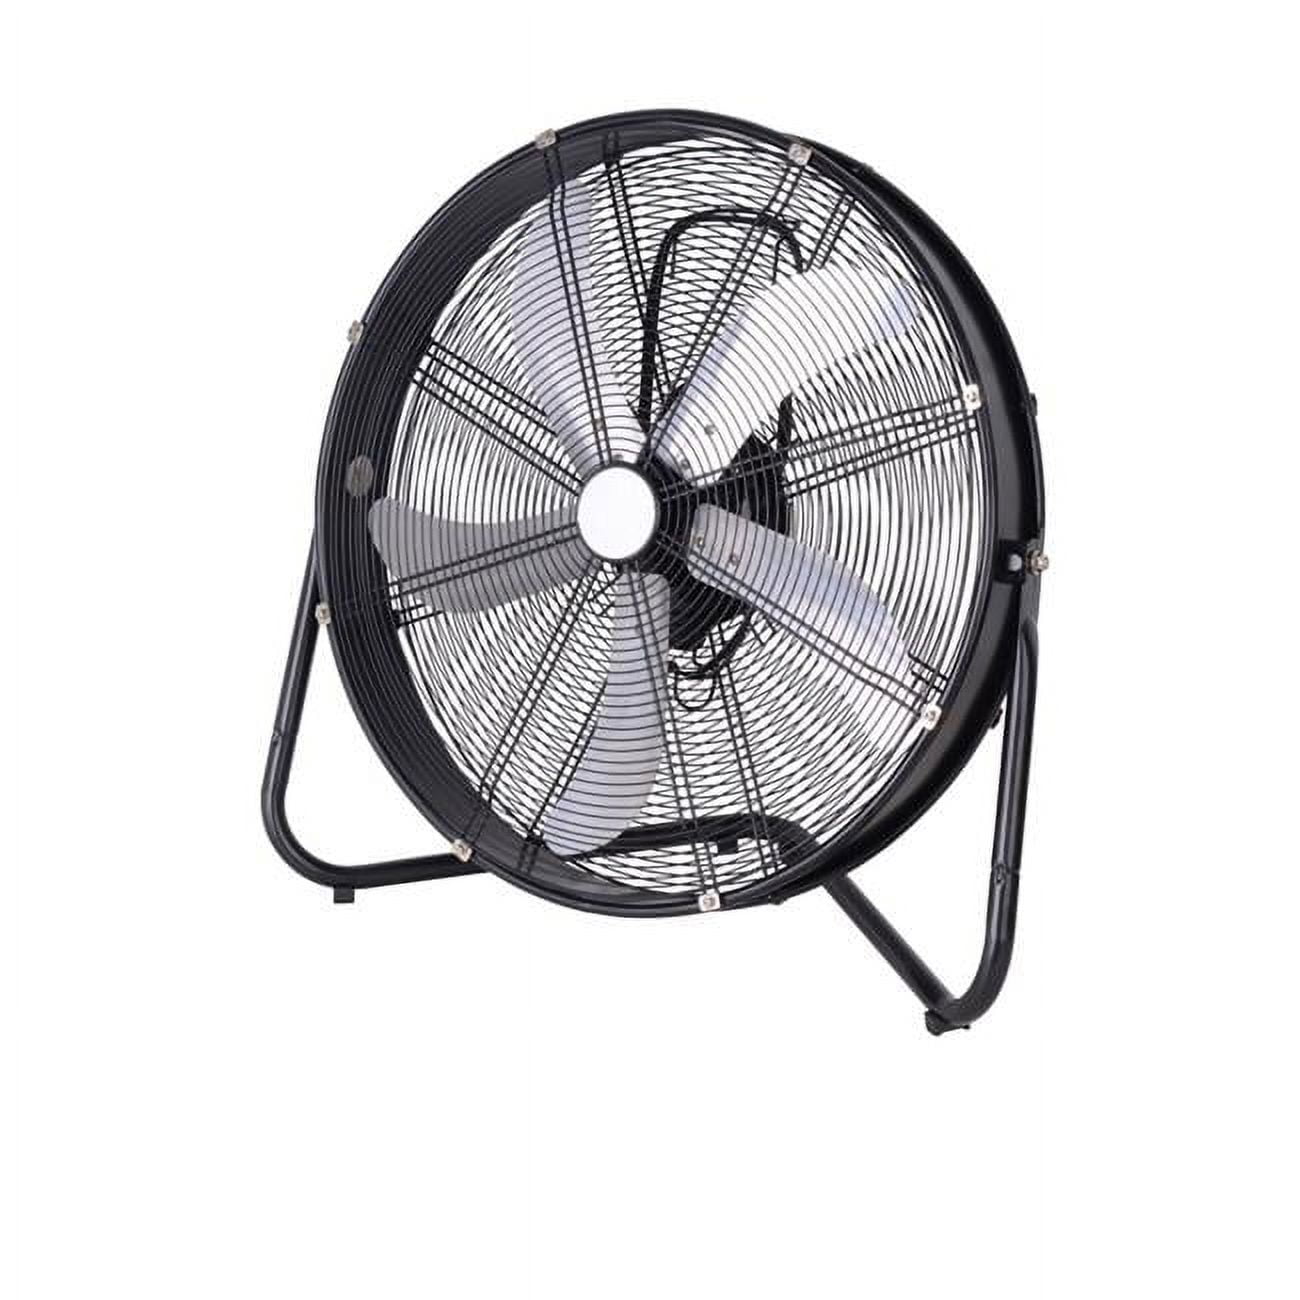 Picture of Aire One 6360291 21.9 x 23.3 x 6.9 x 20 in. Dia. High Velocity Fan 3 Speed Electric 3 Blade